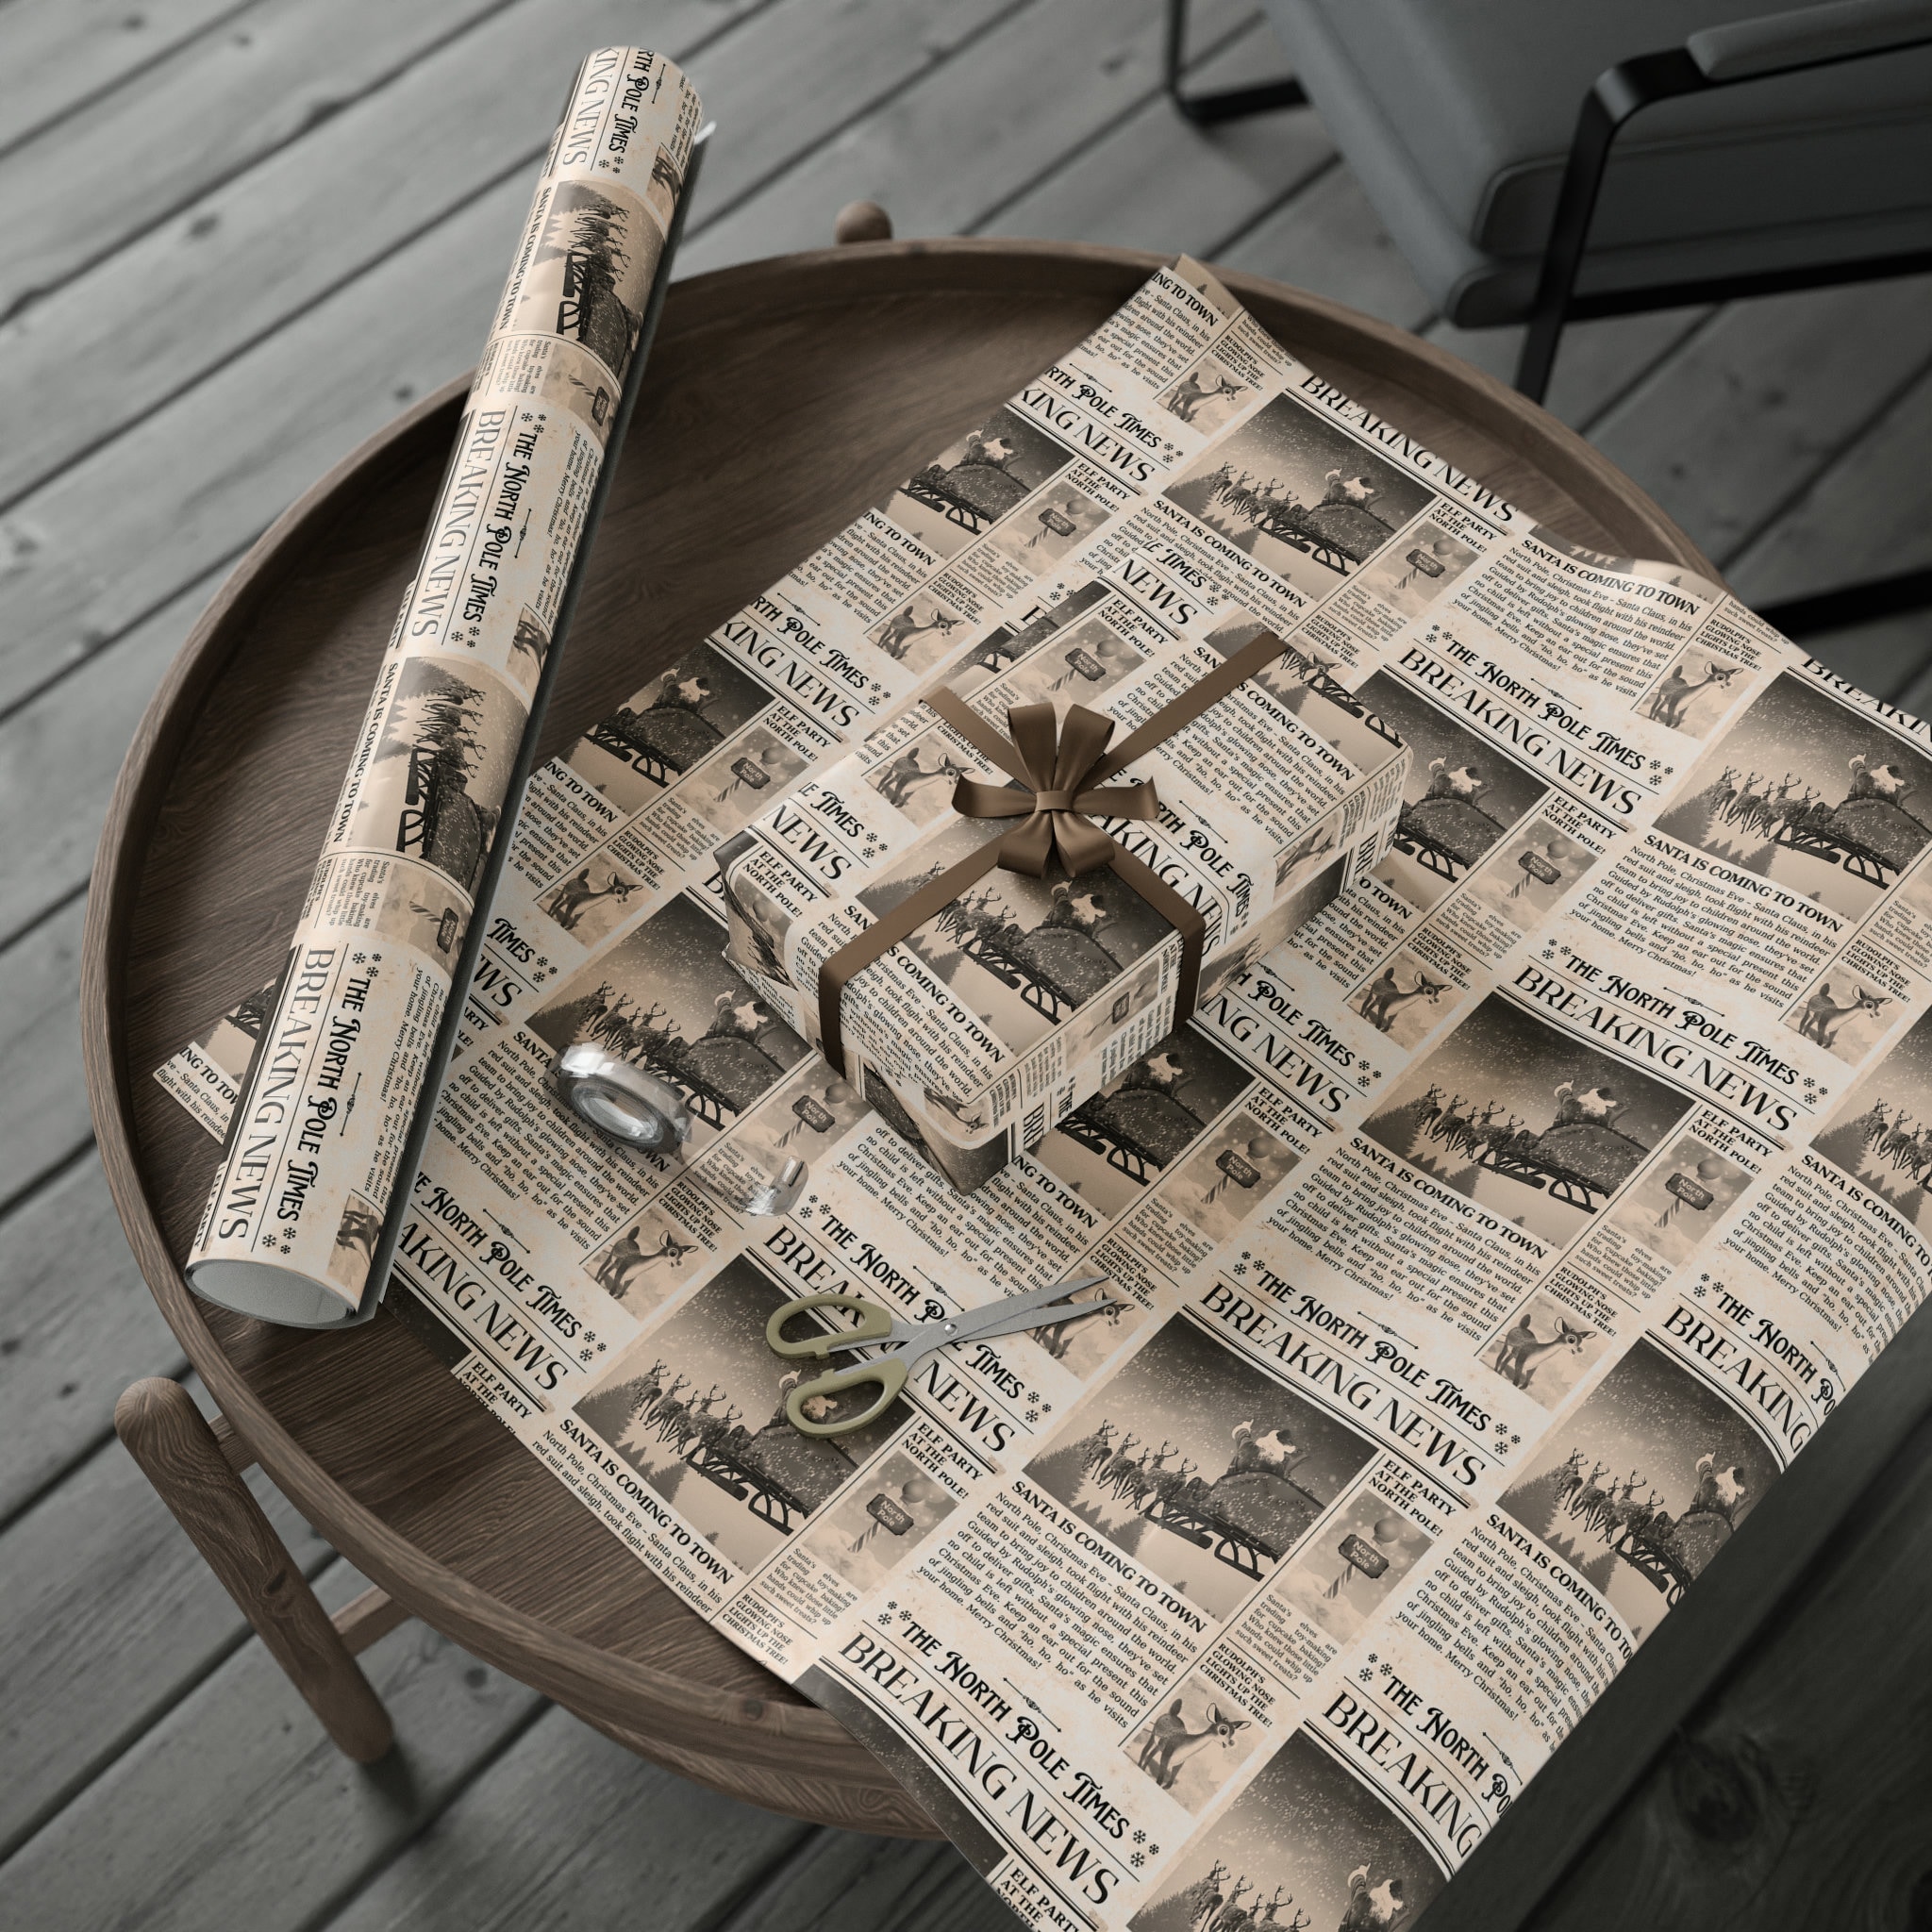 Christmas Wrapping Paper, Cute Newspaper Wrapping Paper Santa North Pole  Newspaper Christmas Crapping Paper sold by Jody Moles, SKU 92297234